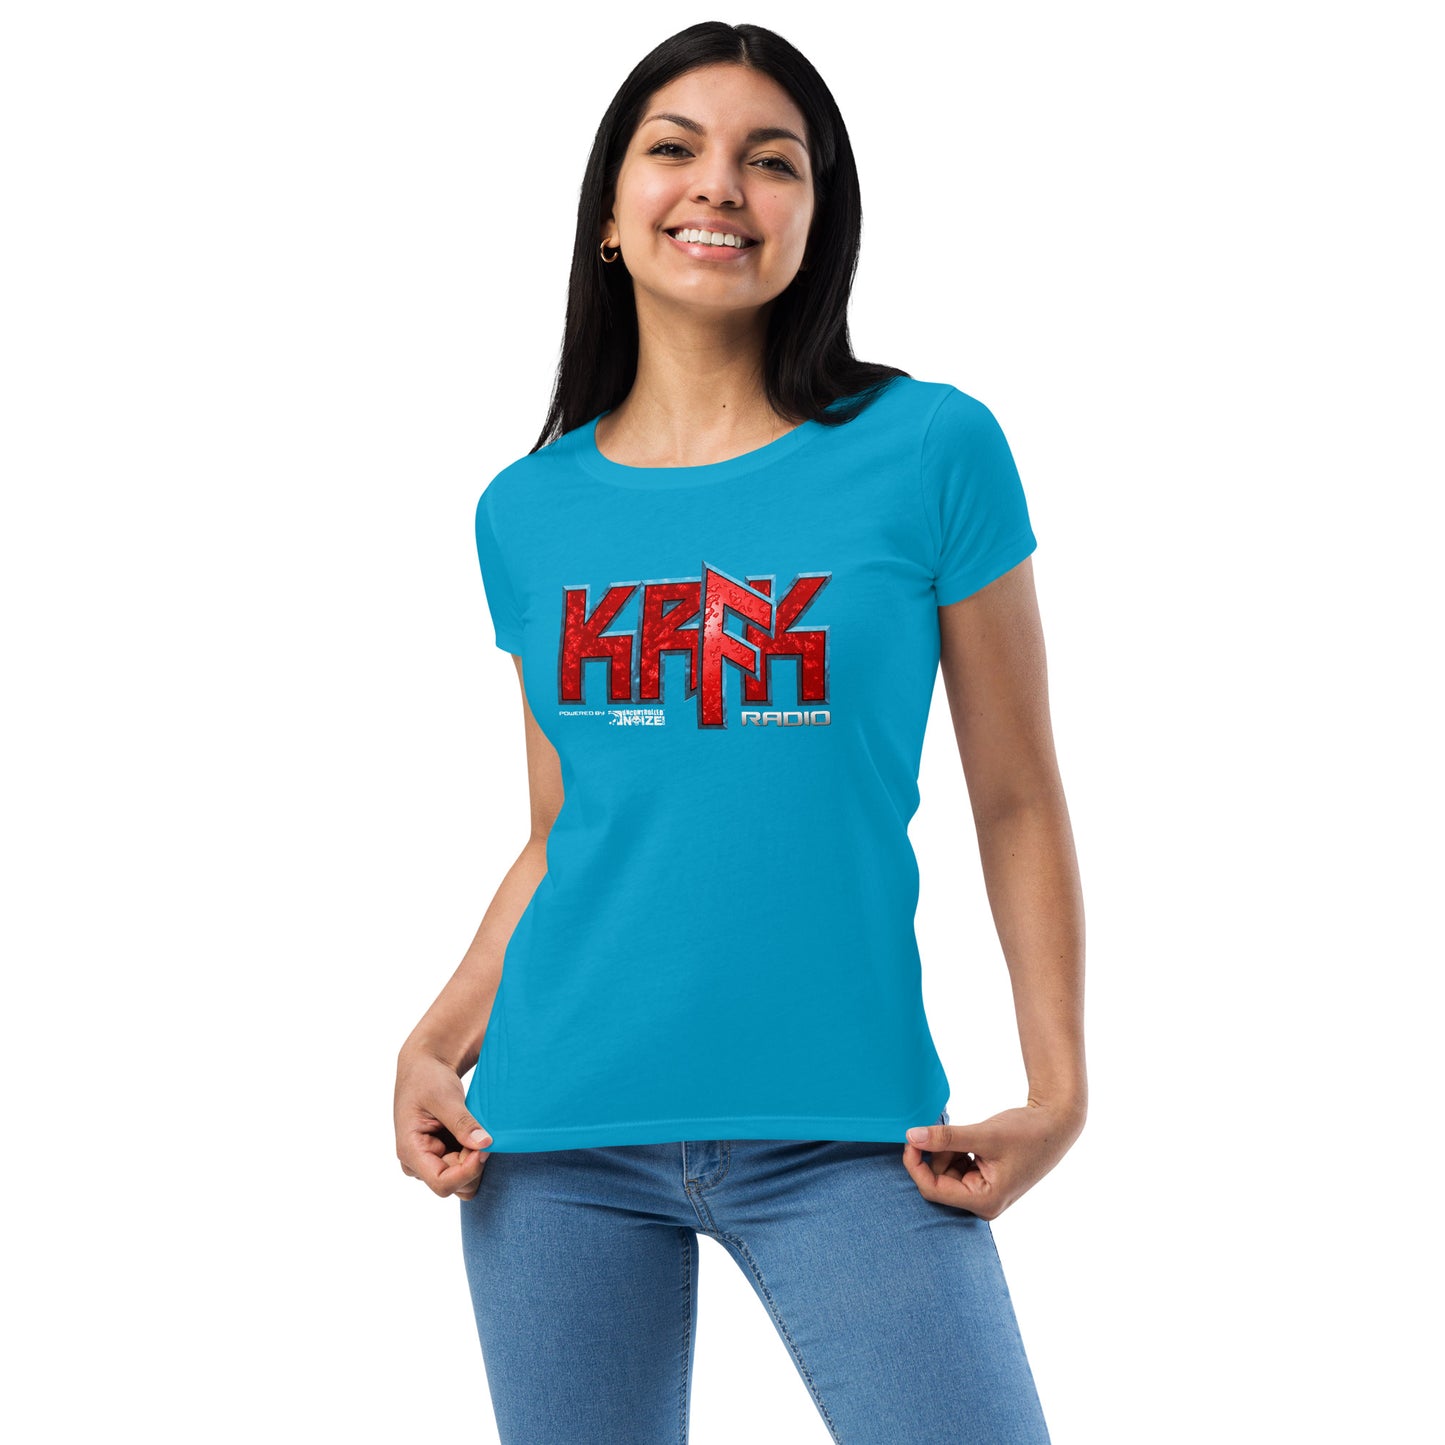 KRFK women’s fitted t-shirt